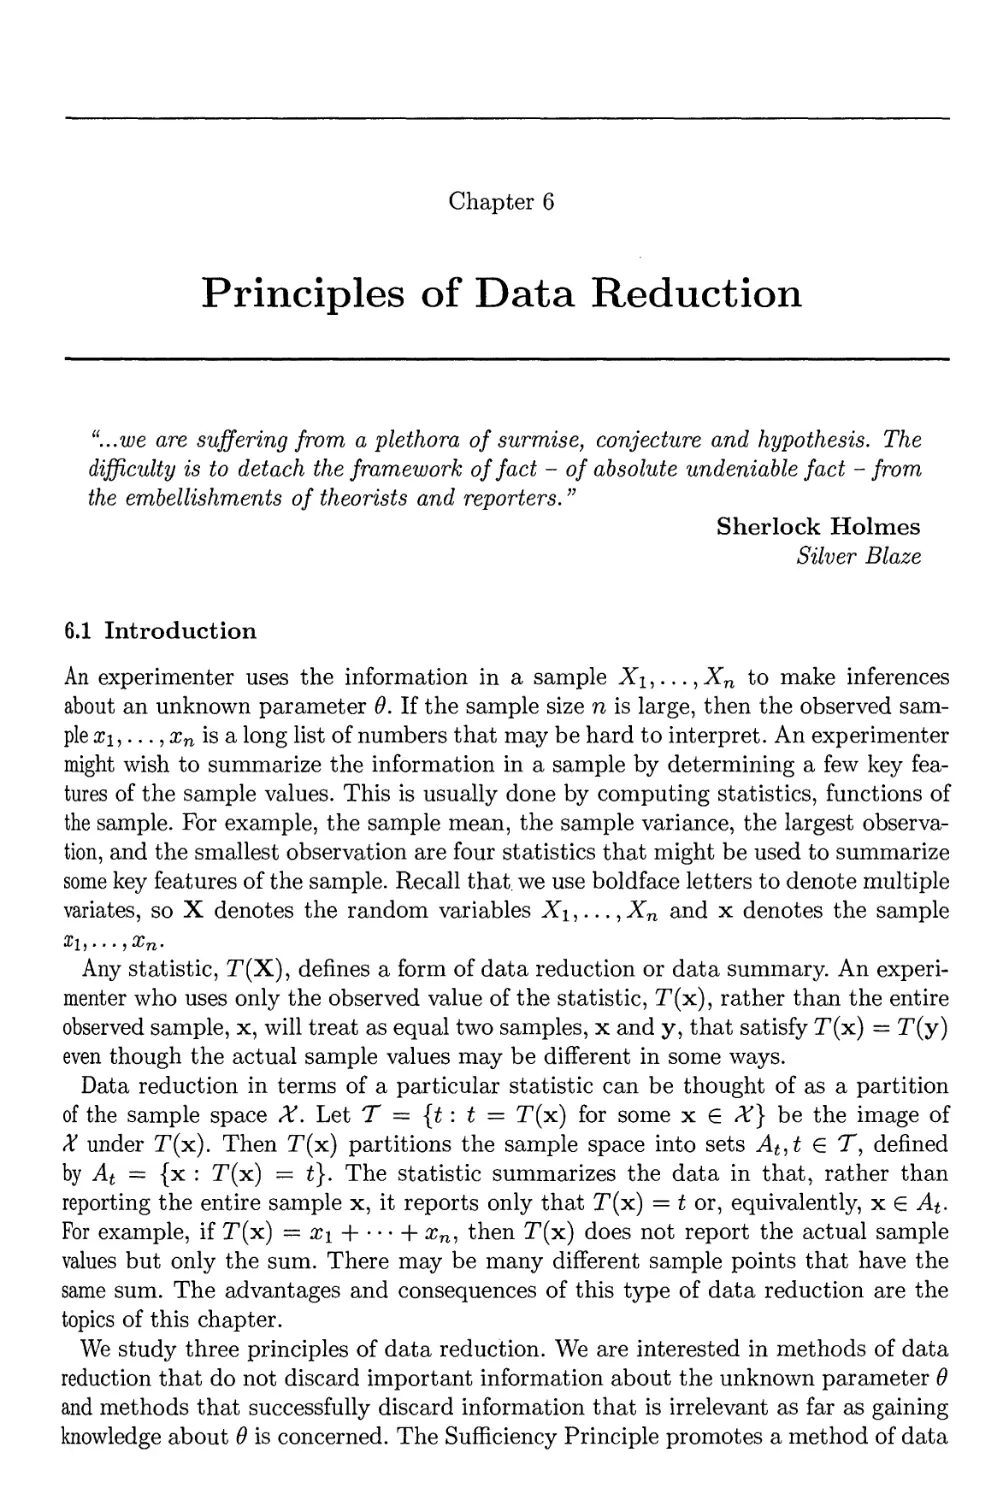 6. Principles of Data Reduction